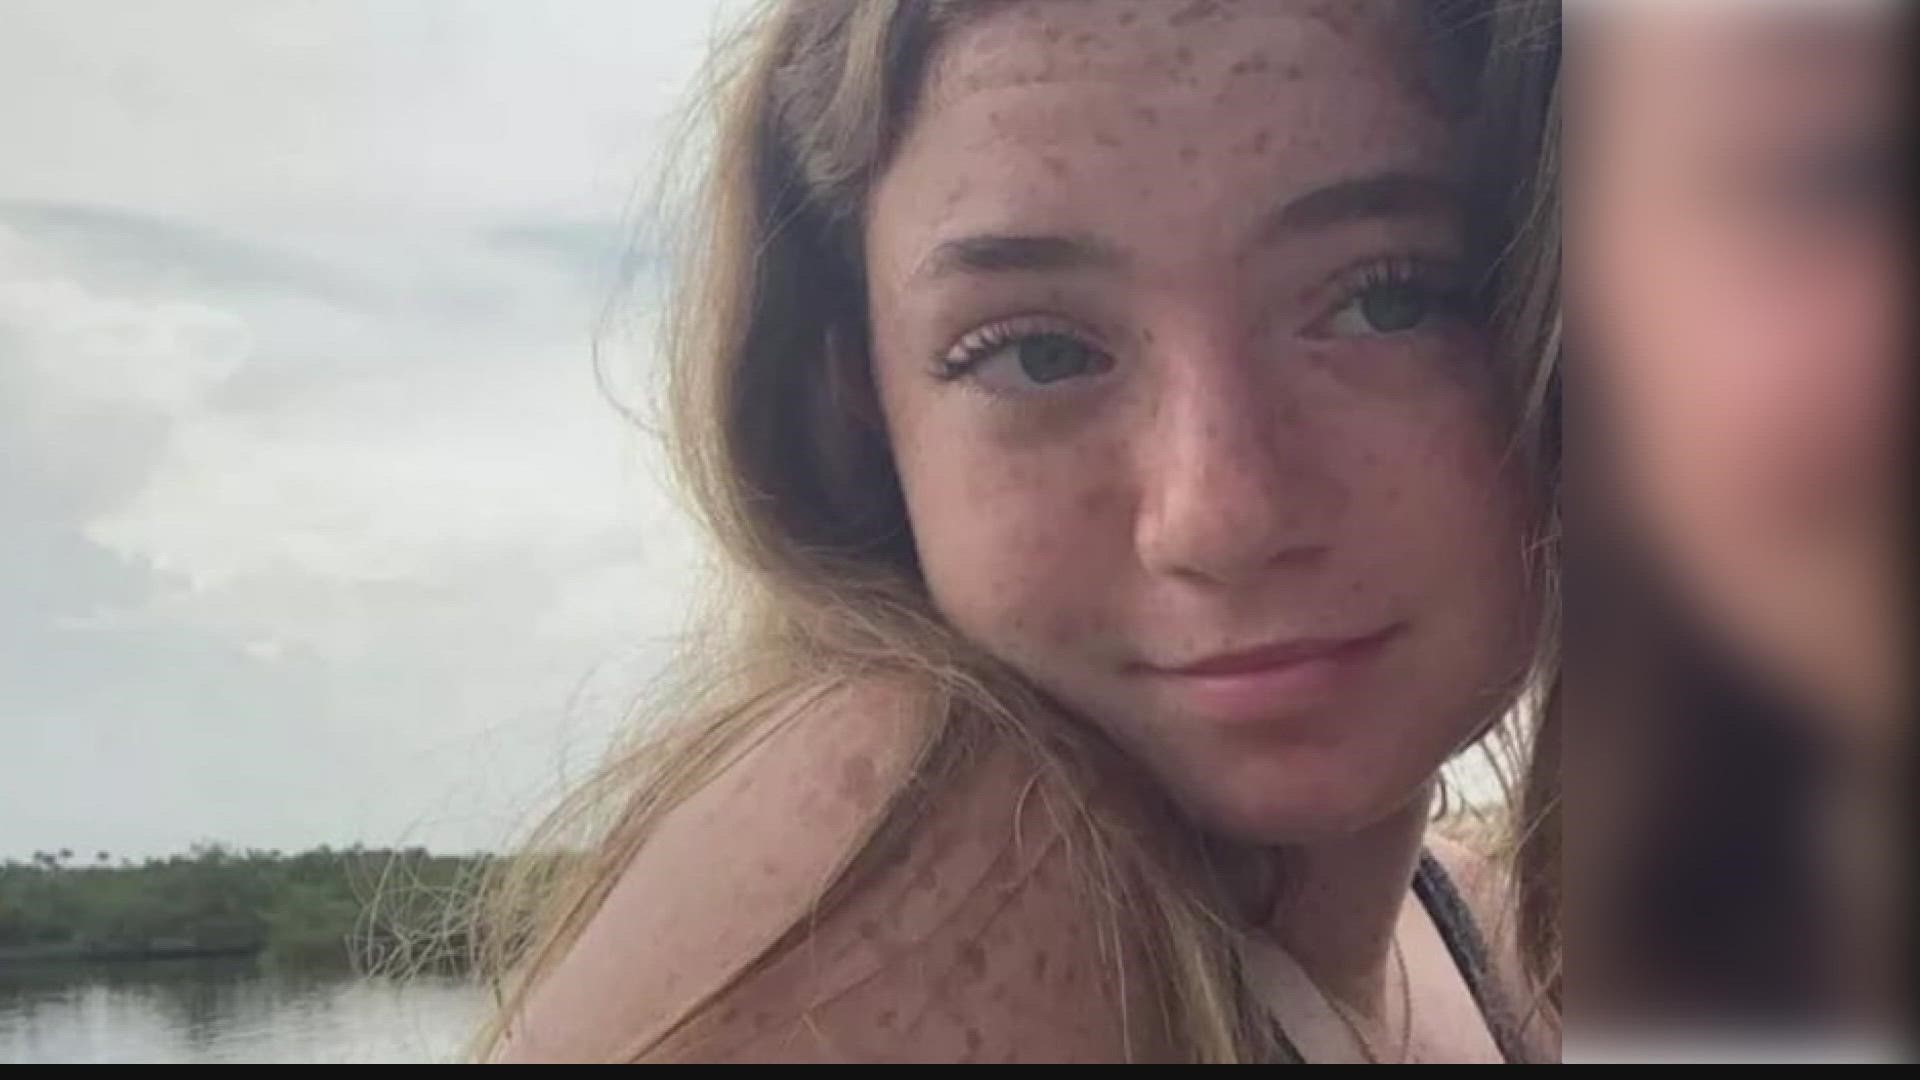 She was put into a medically induced coma after the accident to support her brain healing, her family says. However, she died last Friday, family said.